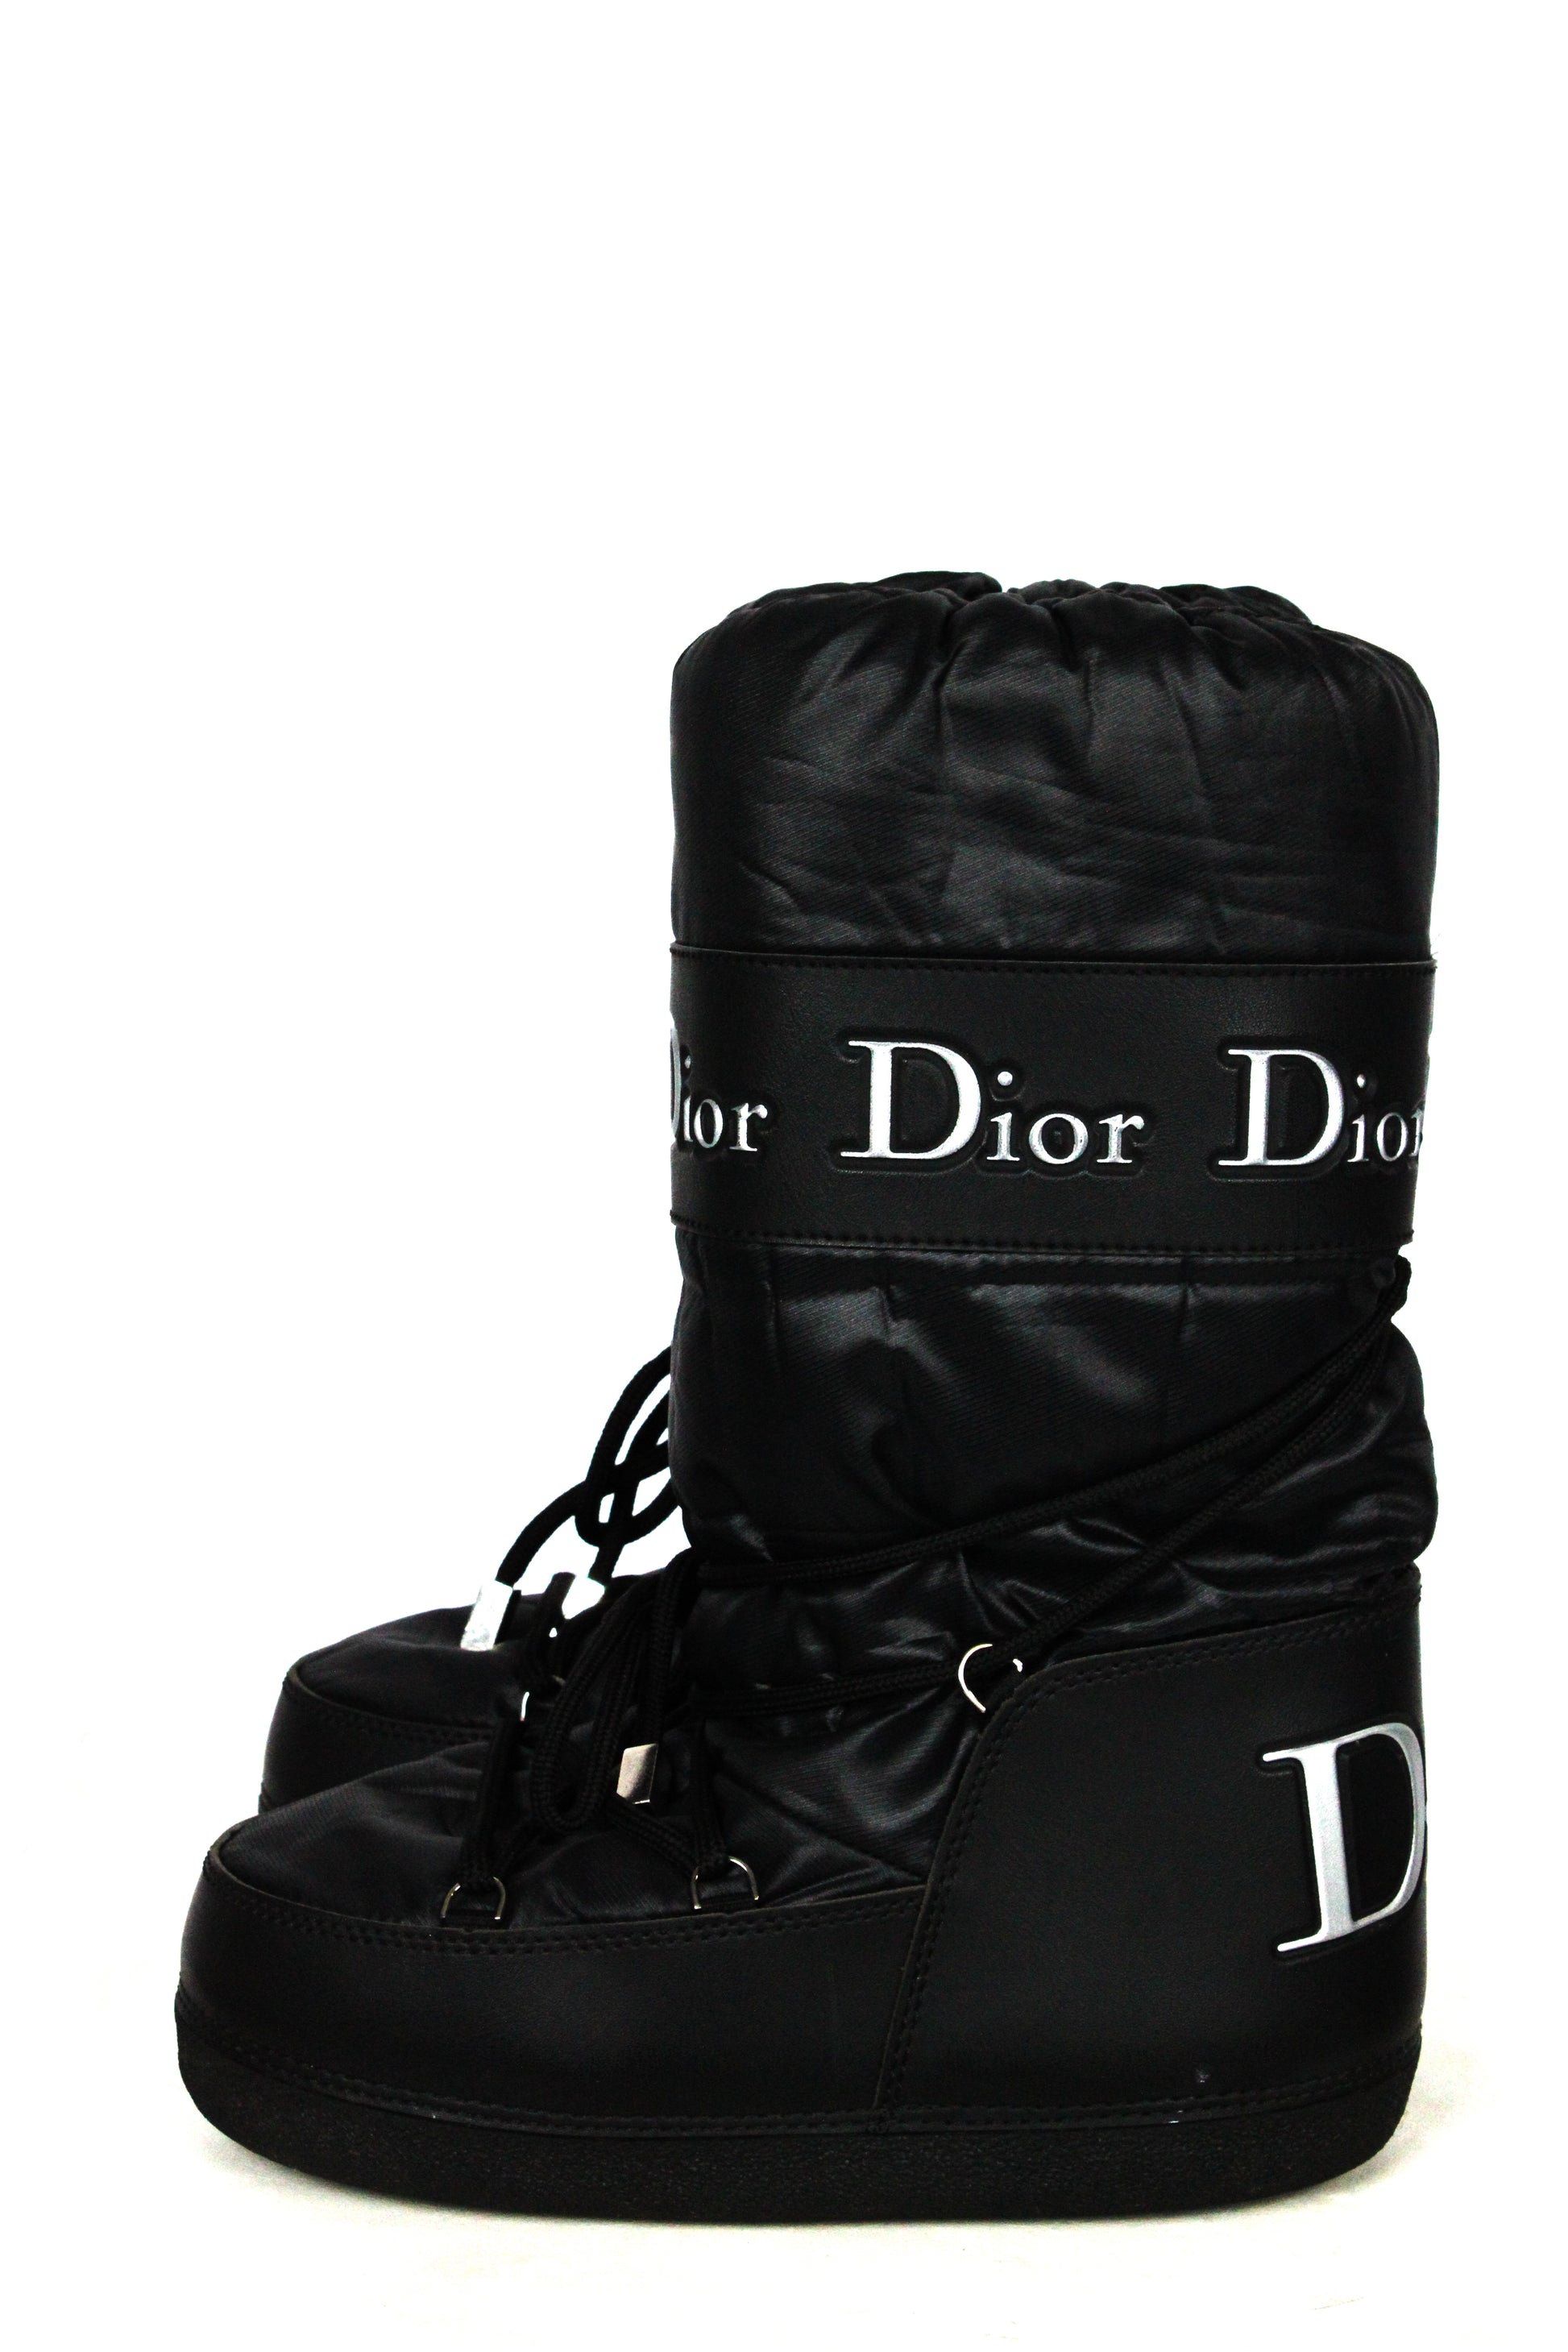 Dior by John Galliano Moon Boots – Redefine Vintage